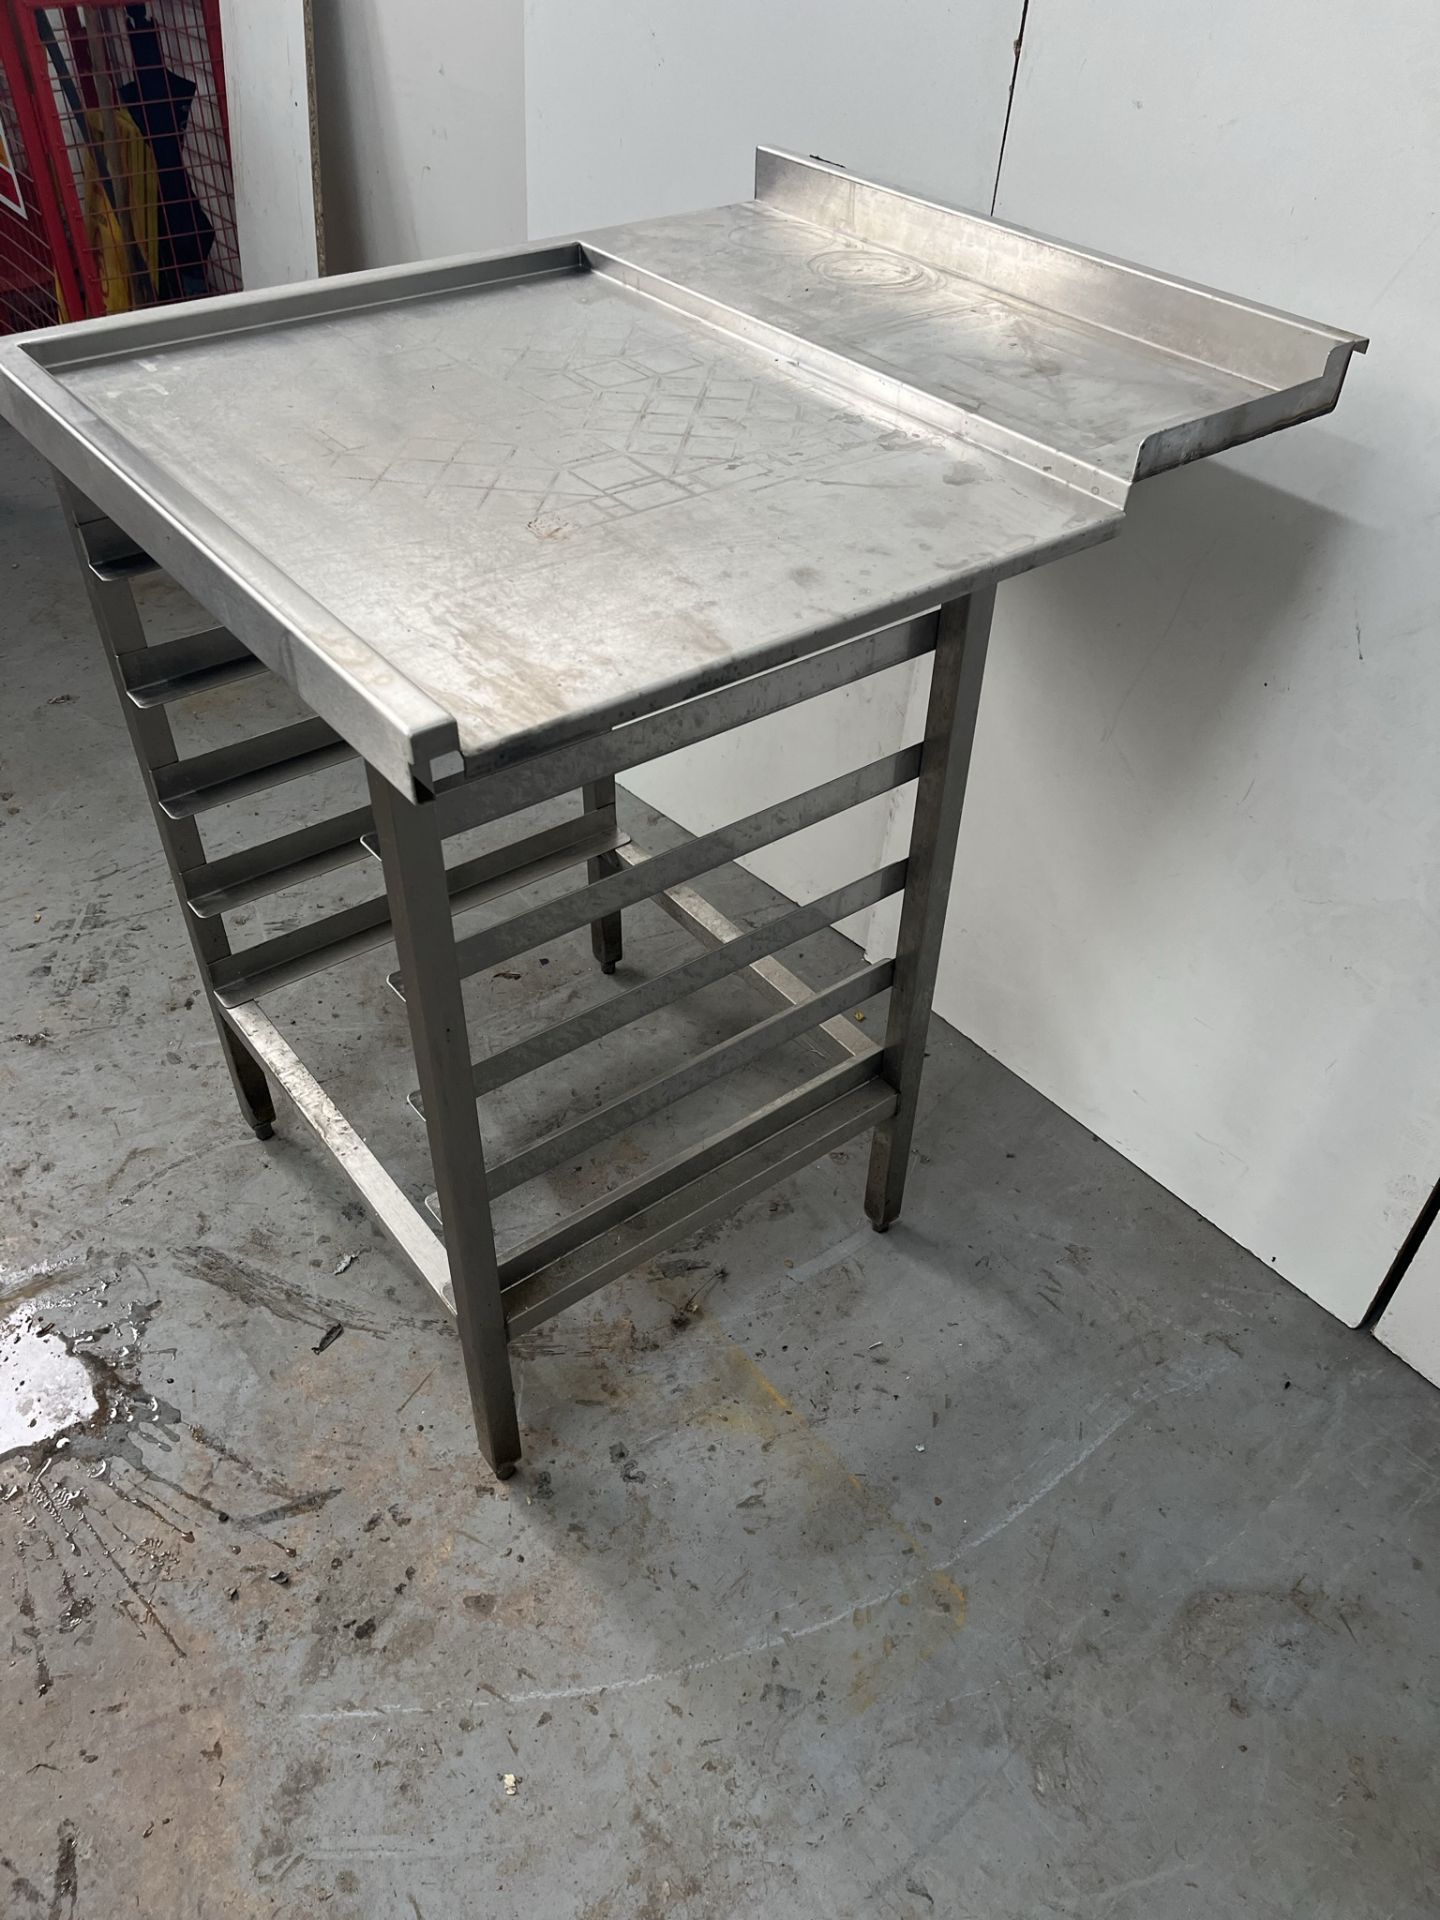 700mm Stainless Steel Catering Preperation Table - Image 3 of 5